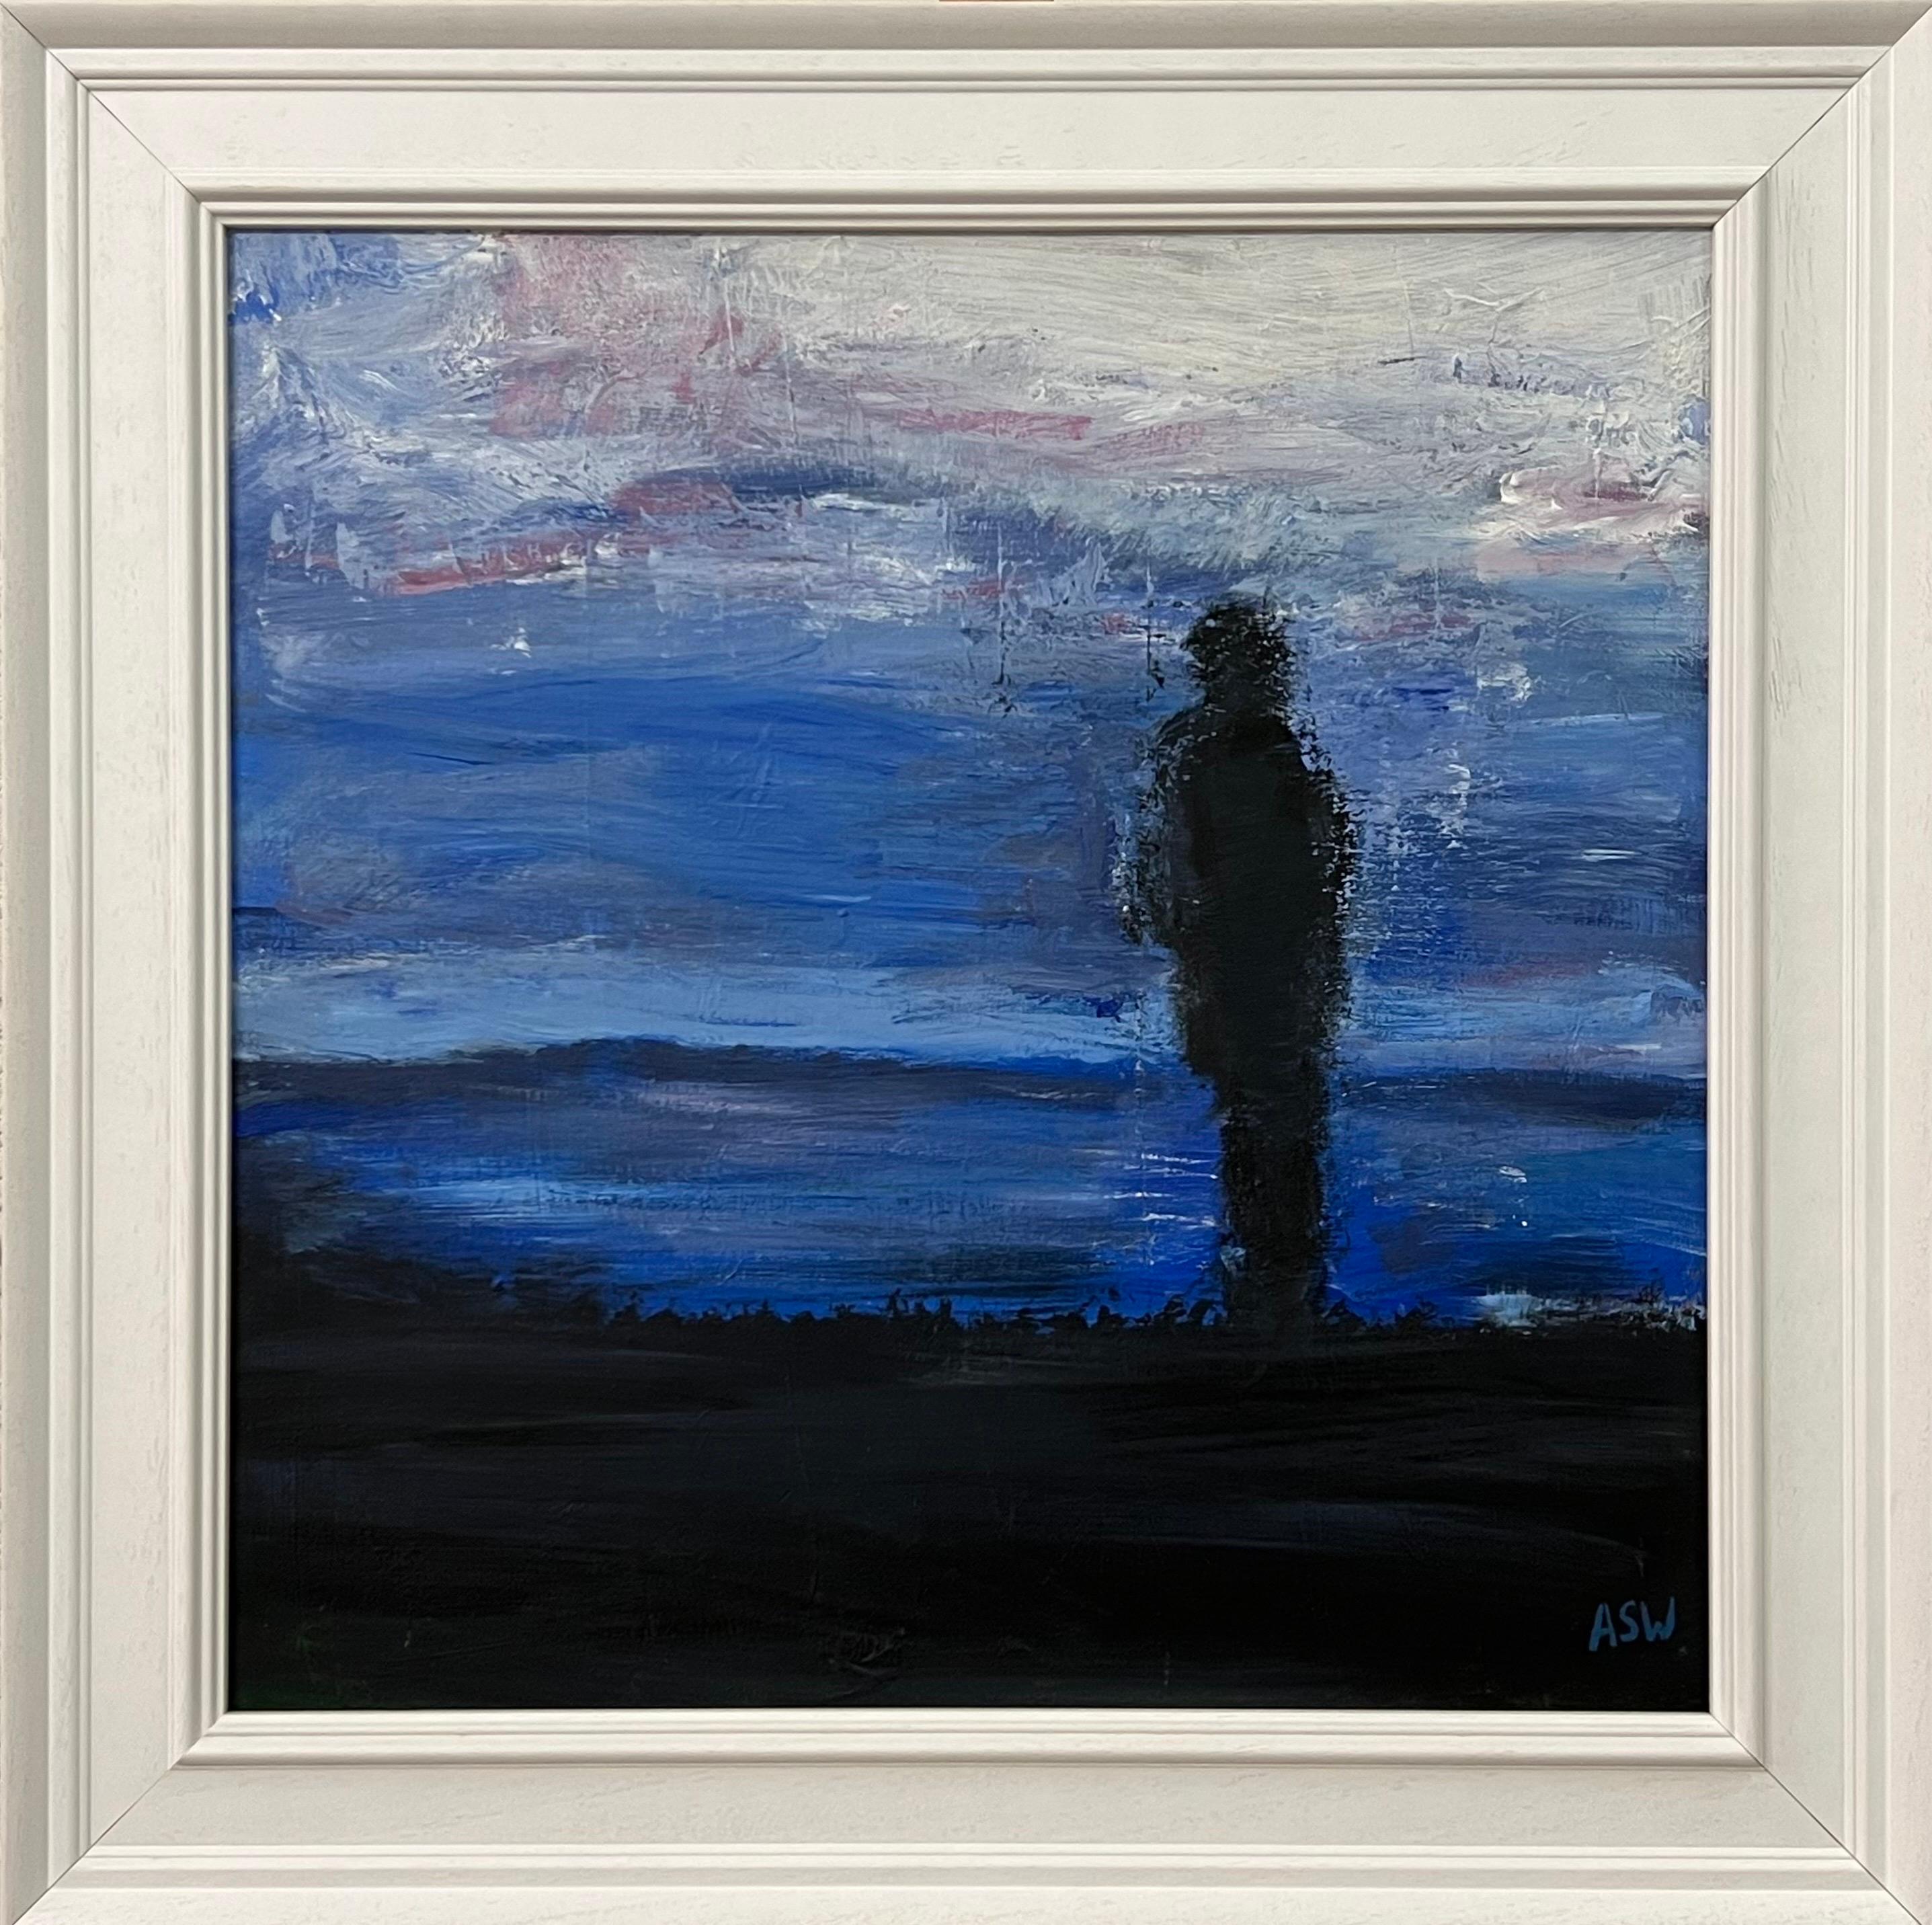 Angela Wakefield Figurative Painting - Man on the Hill Original Painting "Contemplation" by Contemporary British Artist